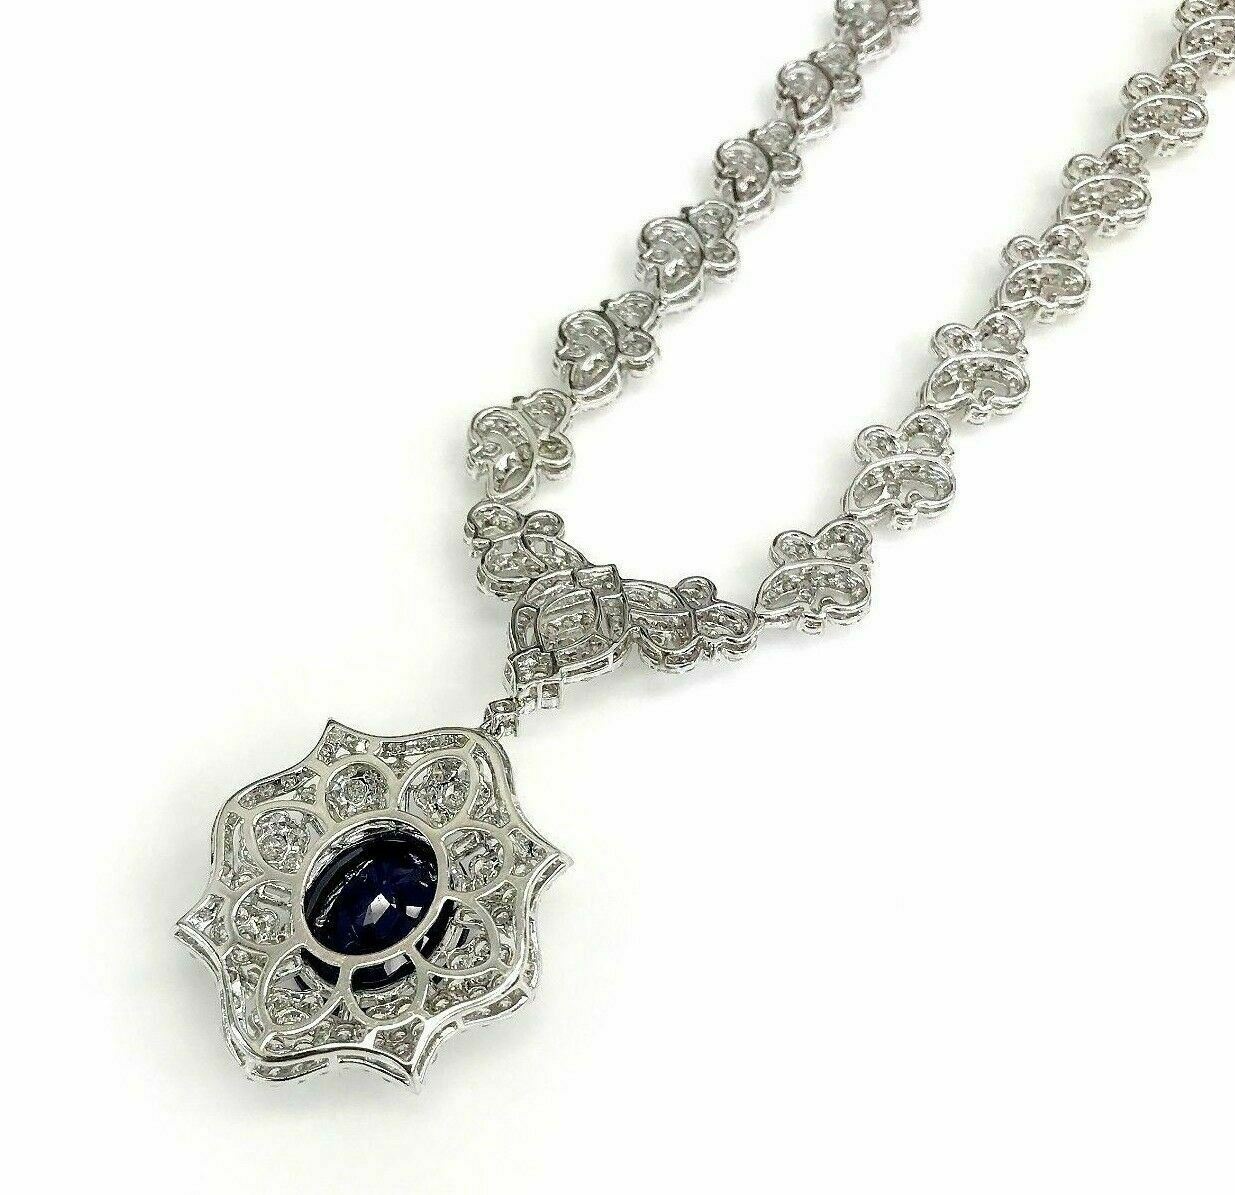 24.05 Carats t.w. Diamond and Blue Sapphire Dinner Necklace 18K Gold 38 Grams